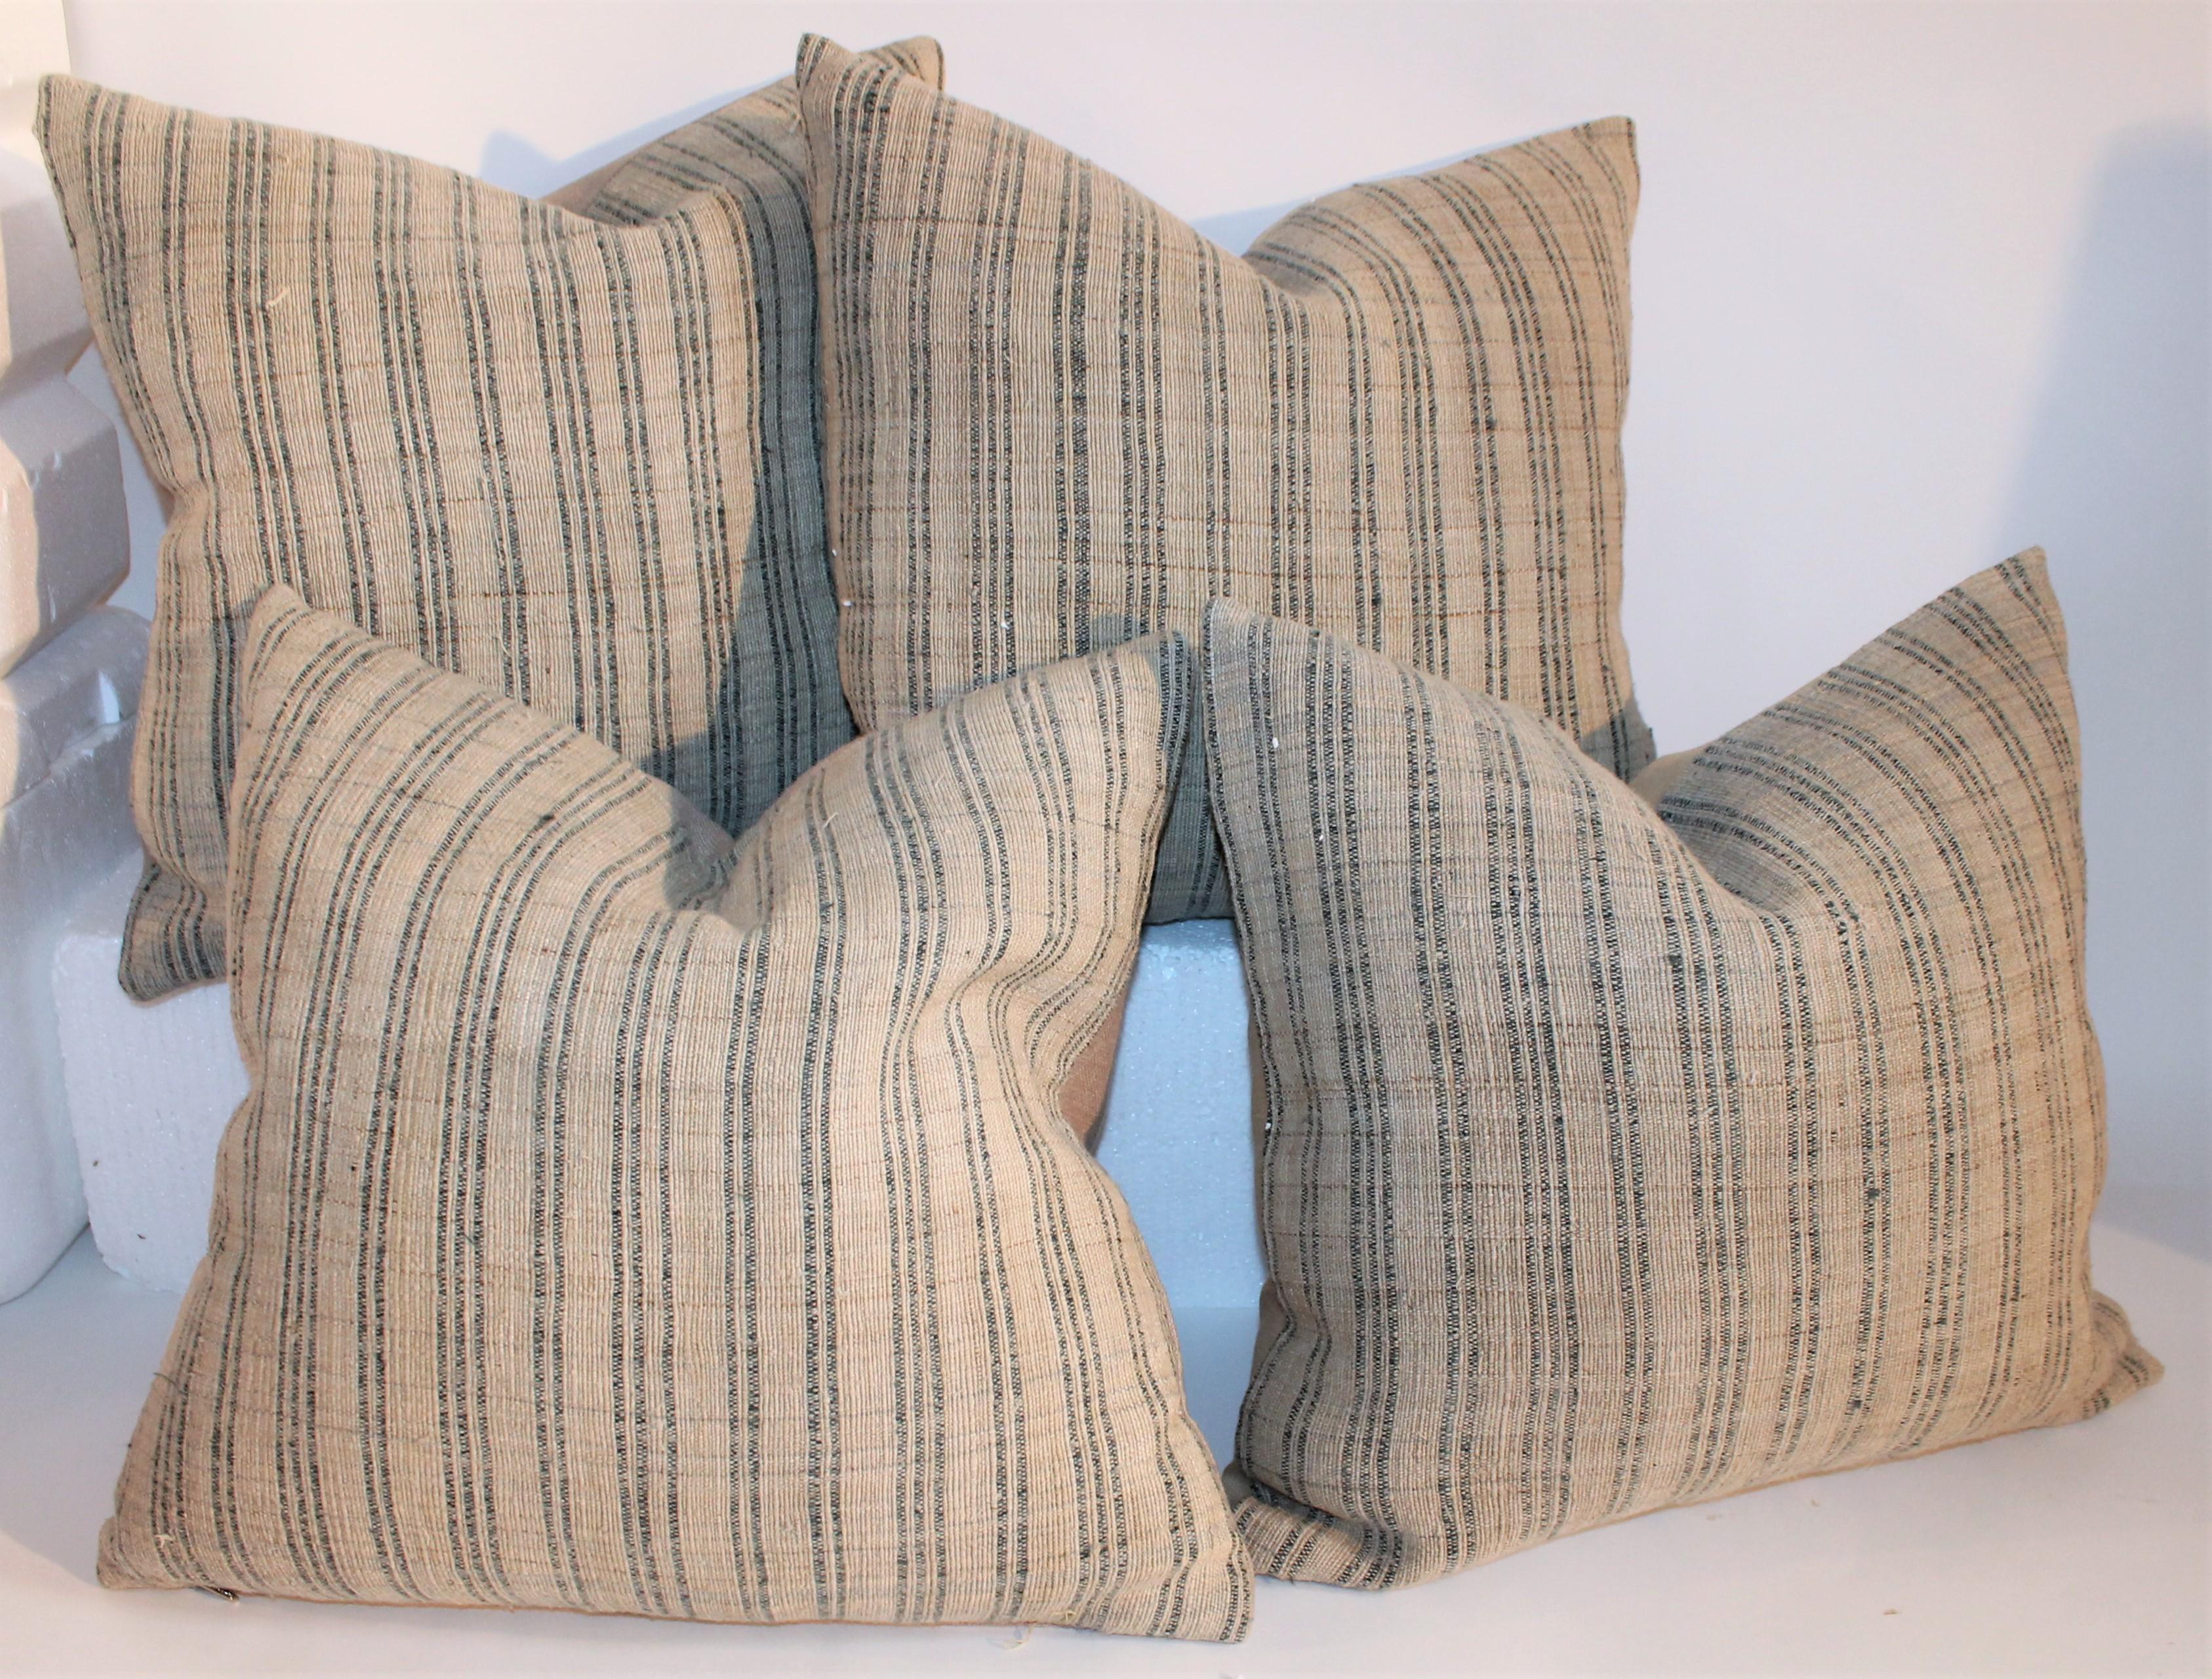 Country 19th Century Linen Ticking Pillows, Pair